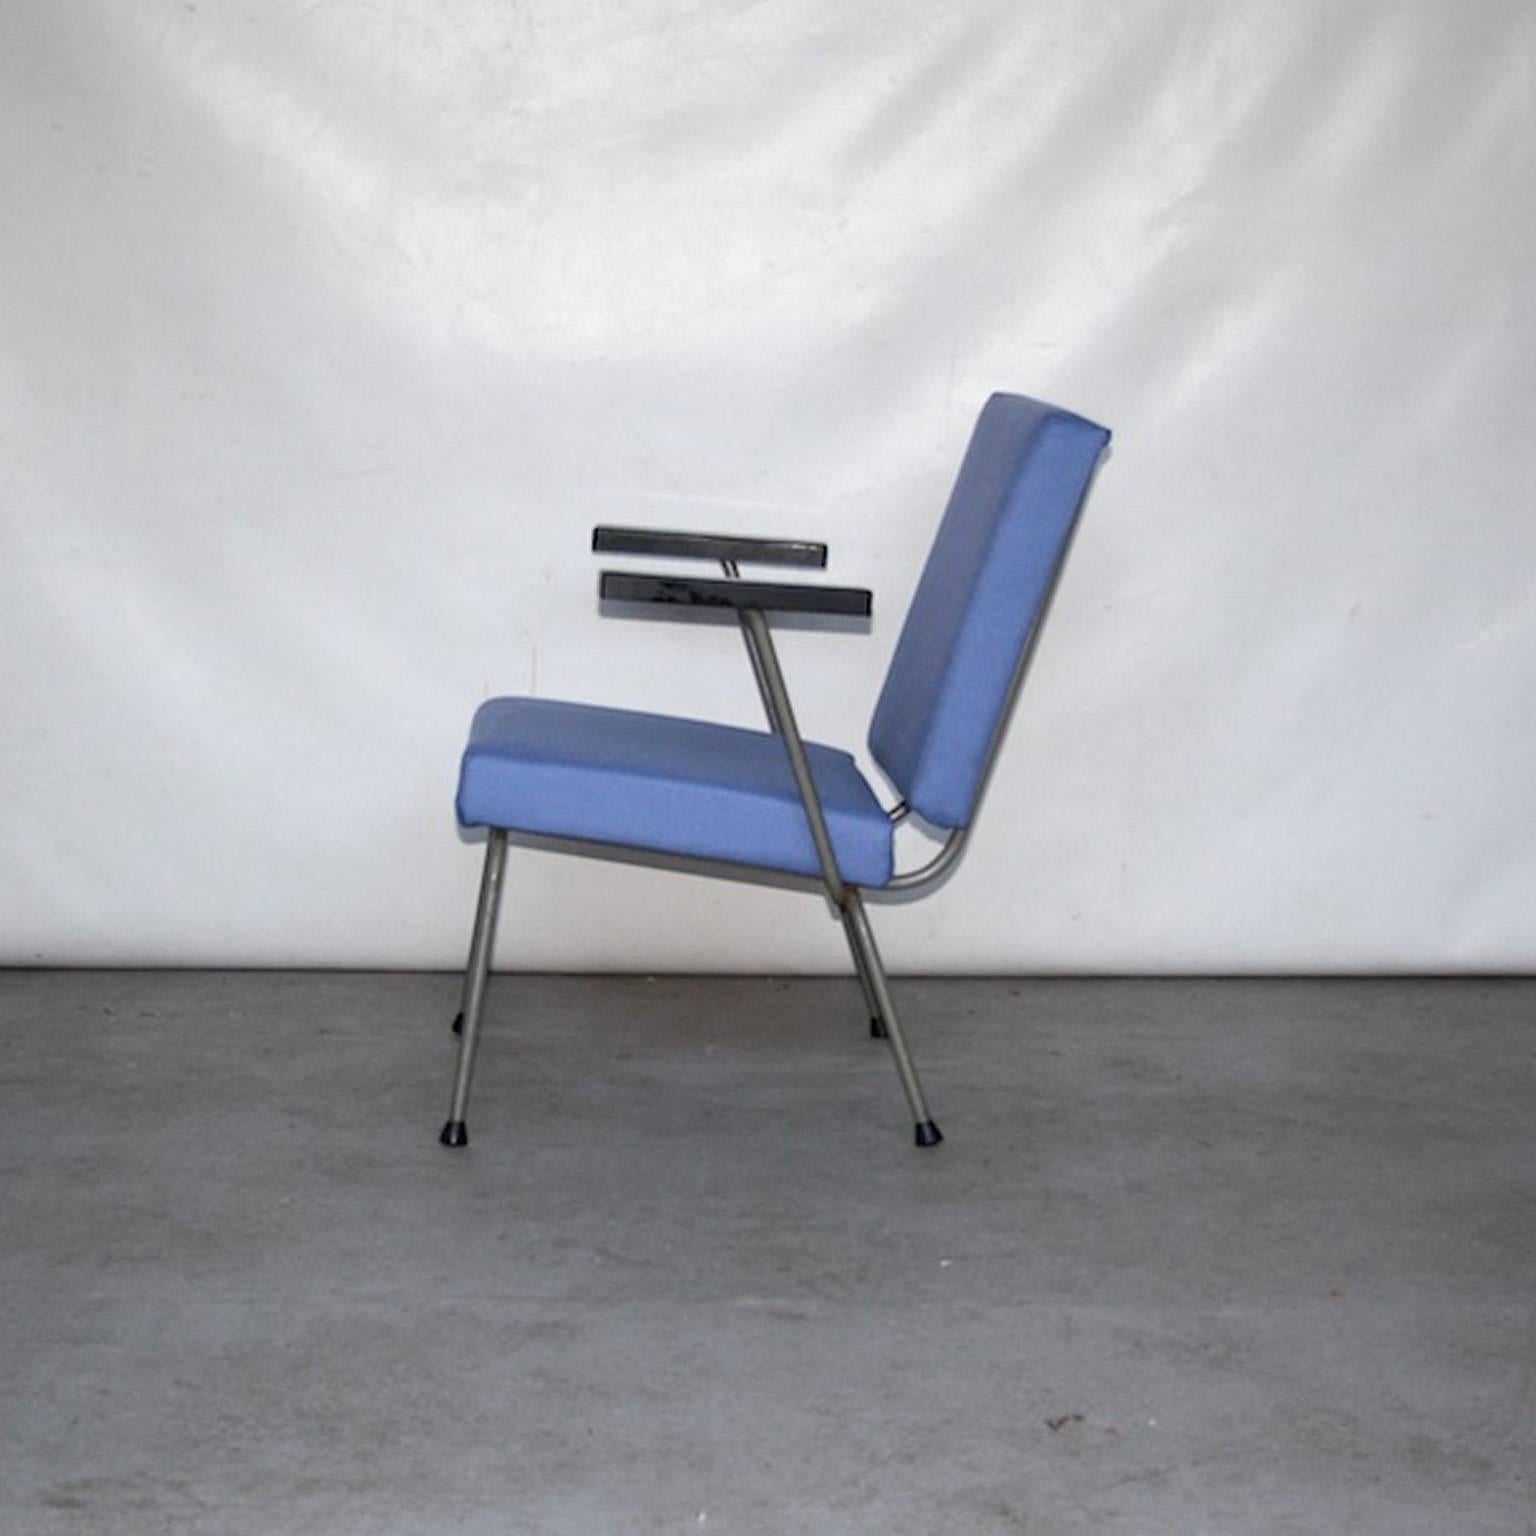 Early example of the stylish lounge chair by Wim Rietveld and A.R. Cordemeyer. With its characteristic minimal metal frame and steel plated construction still a beautiful piece of design nowadays.

Chair is in good vintage condition with new